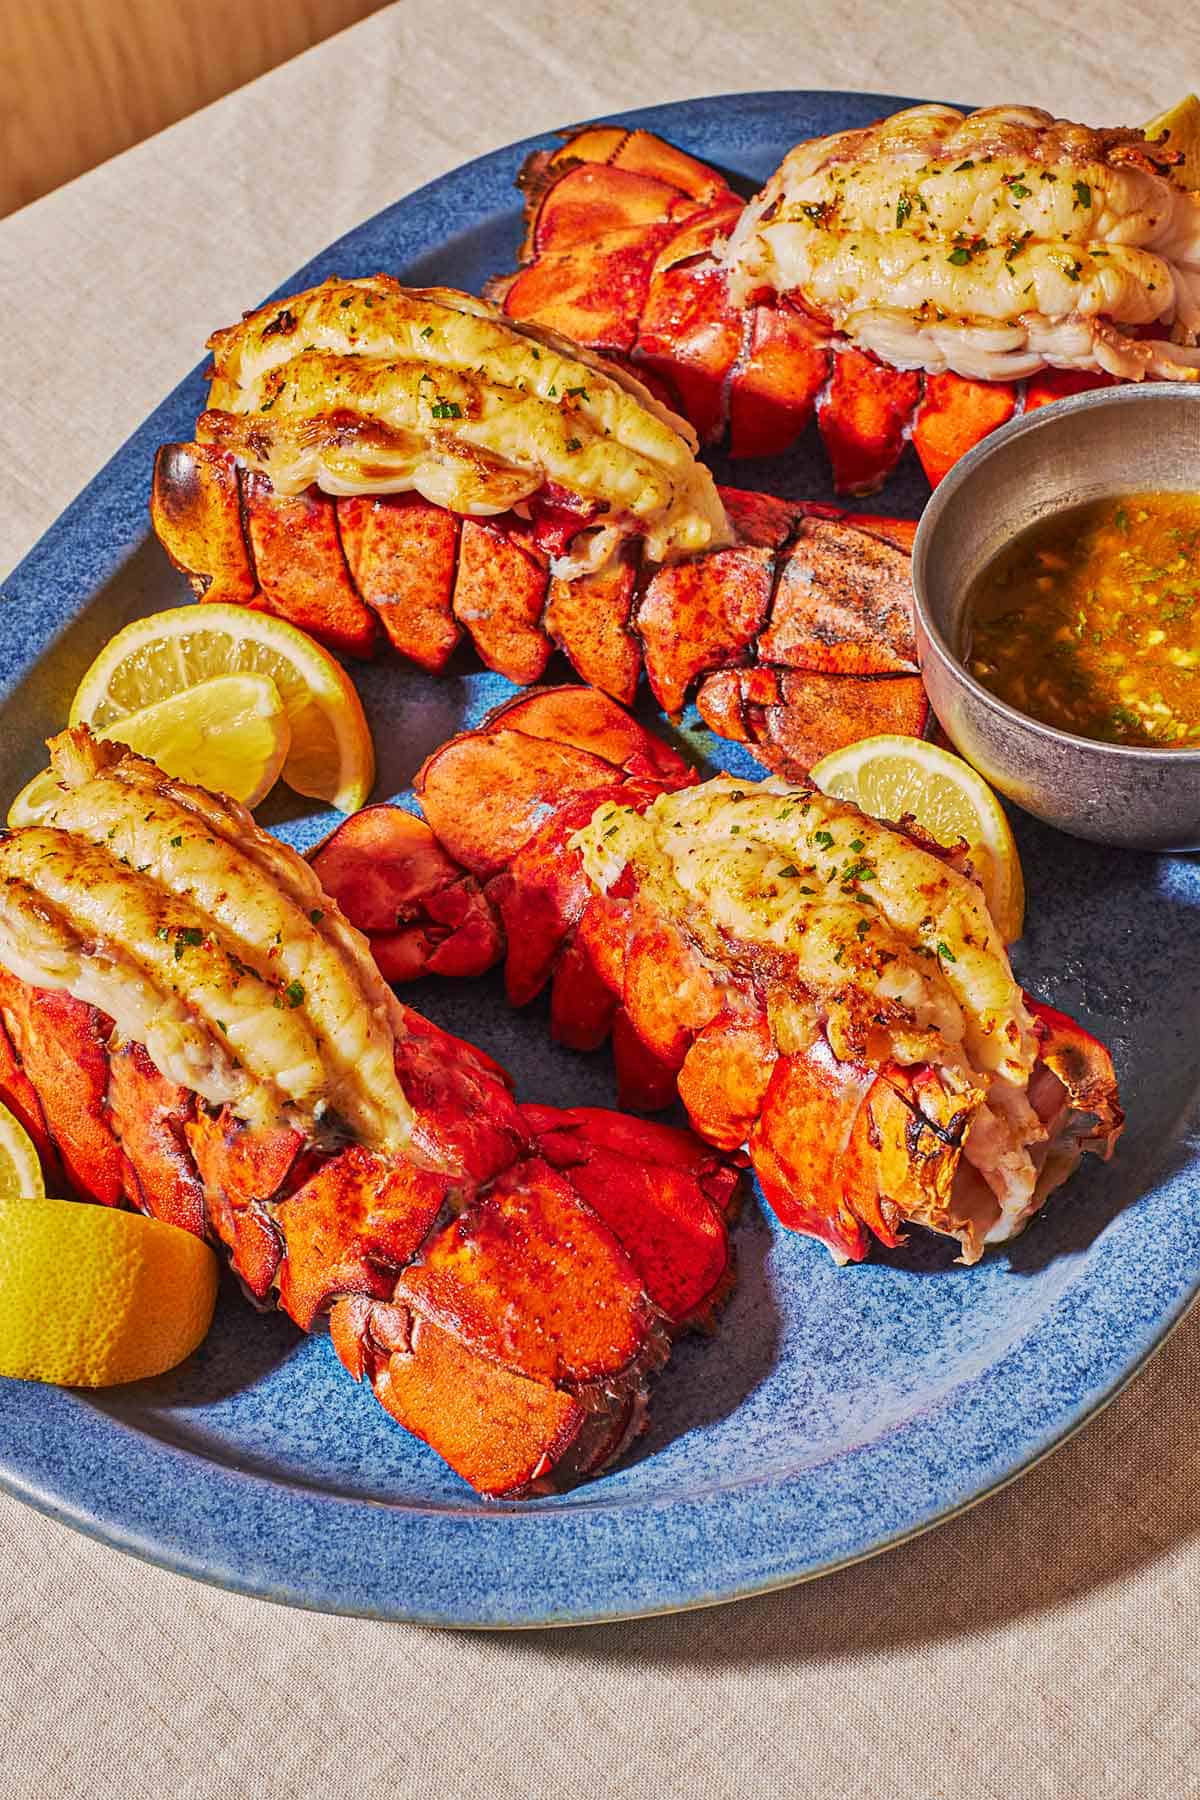 4 broiled lobster tails on a blue serving platter lemon wedges and butter sauce in a small bowl.